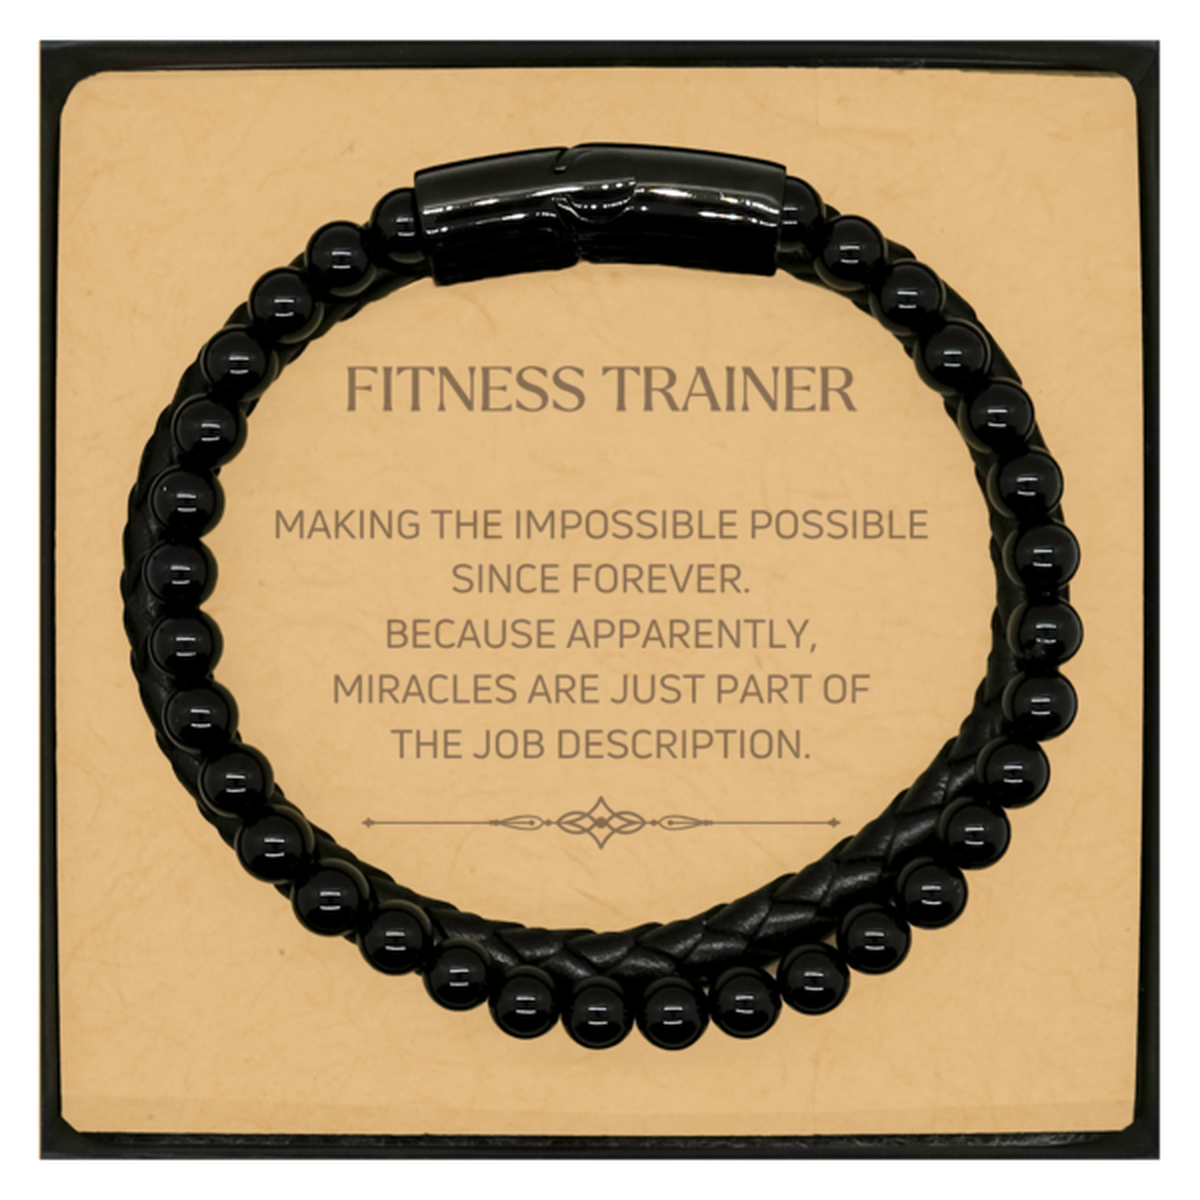 Funny Fitness Trainer Gifts, Miracles are just part of the job description, Inspirational Birthday Christmas Stone Leather Bracelets For Fitness Trainer, Men, Women, Coworkers, Friends, Boss